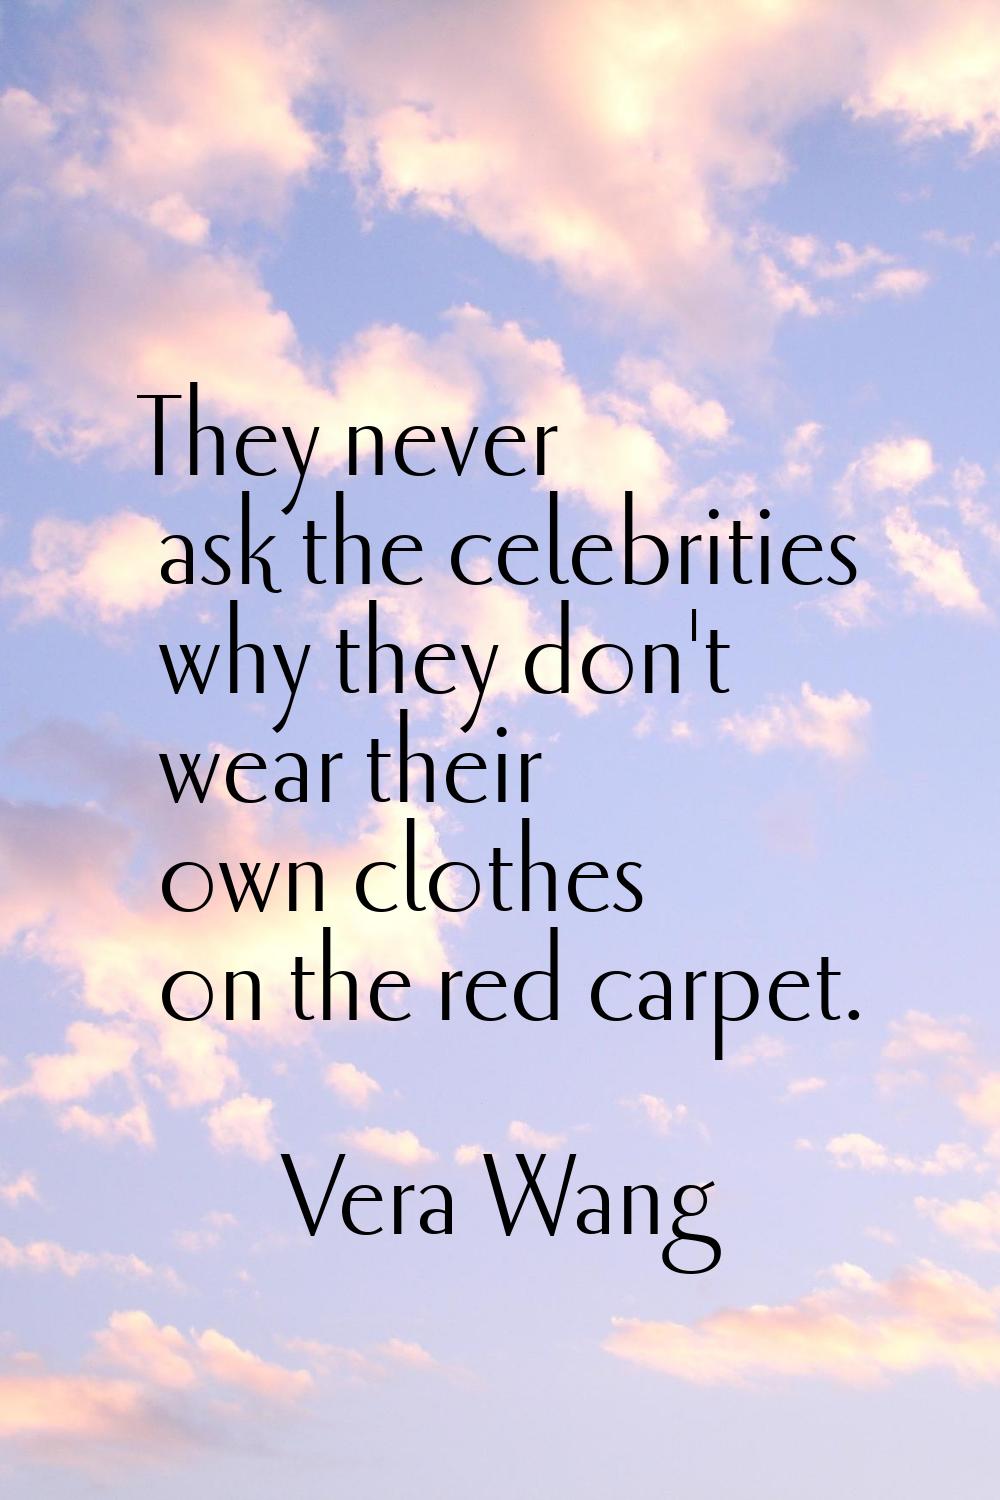 They never ask the celebrities why they don't wear their own clothes on the red carpet.